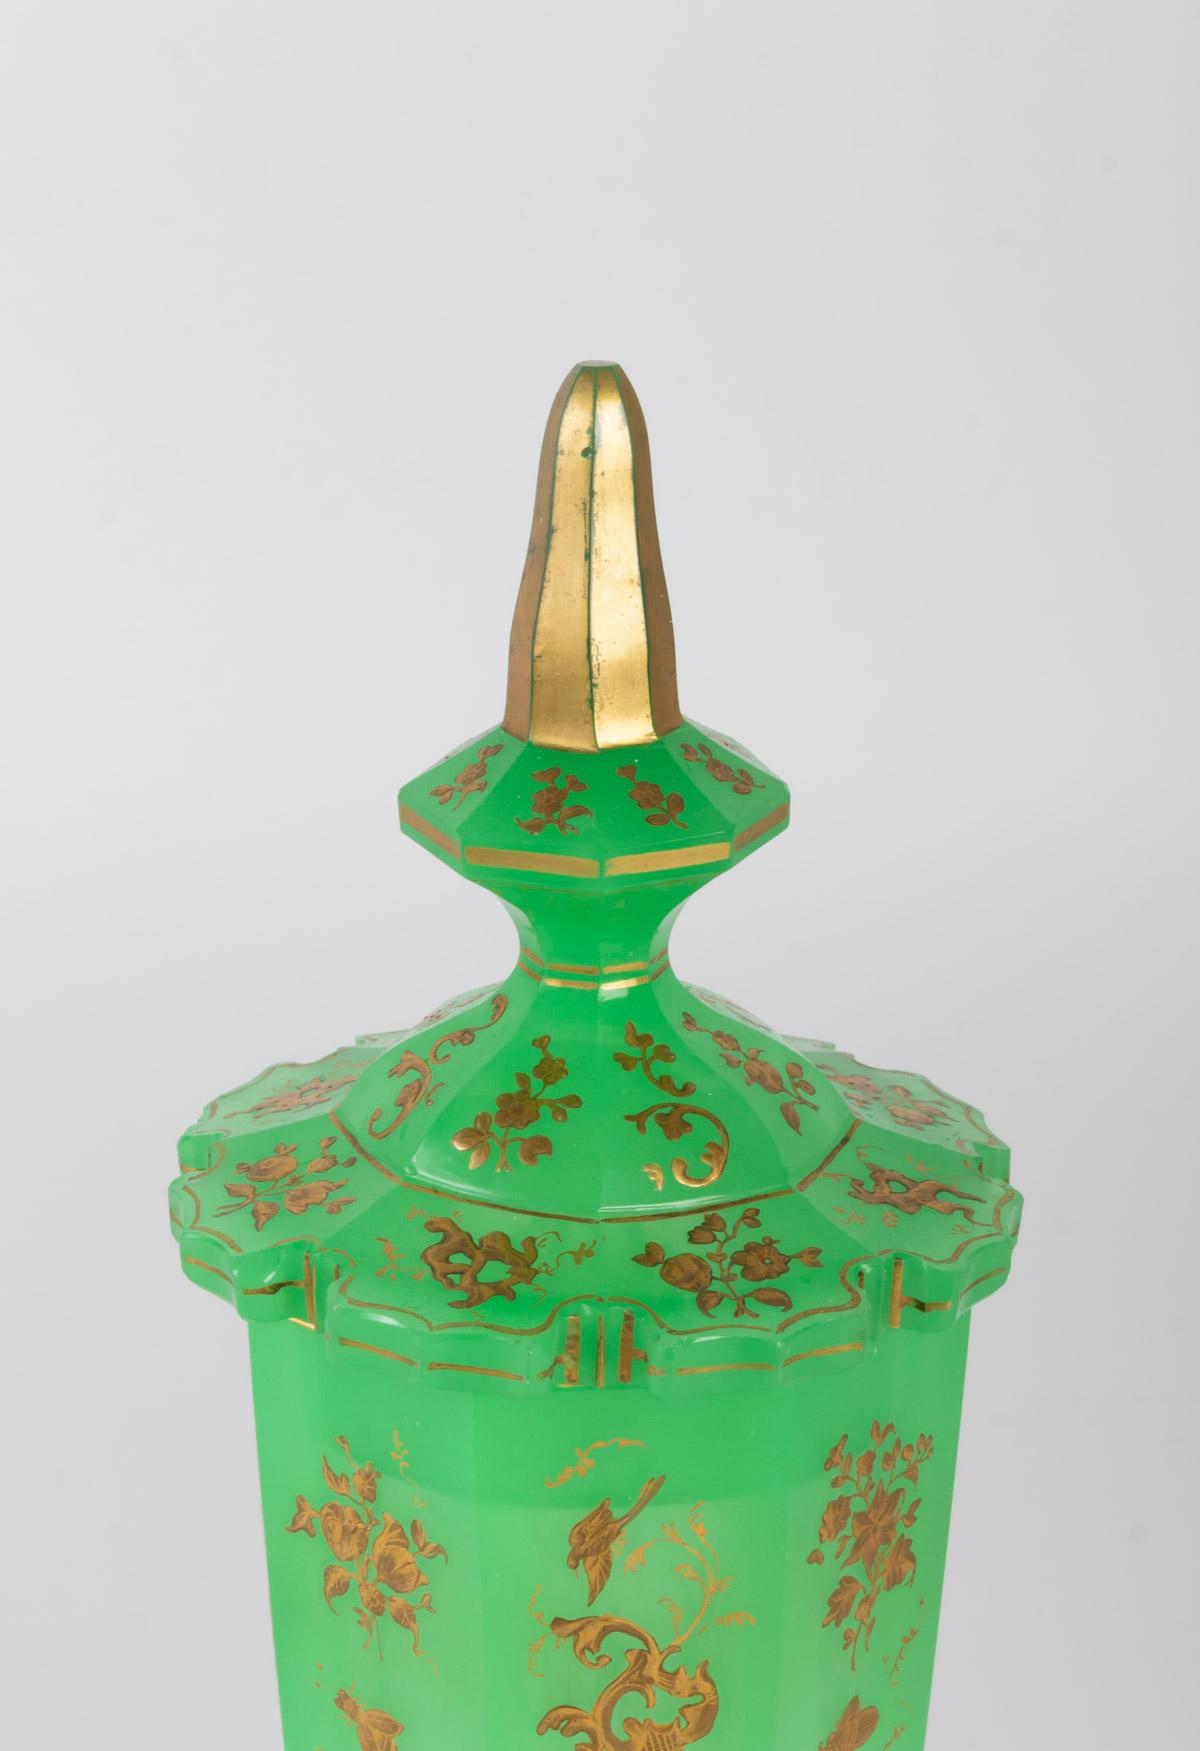 Covered cup in opaline, green and gold enamel, Napoleon III, 19th century
Measures: H 30cm, D 11cm.